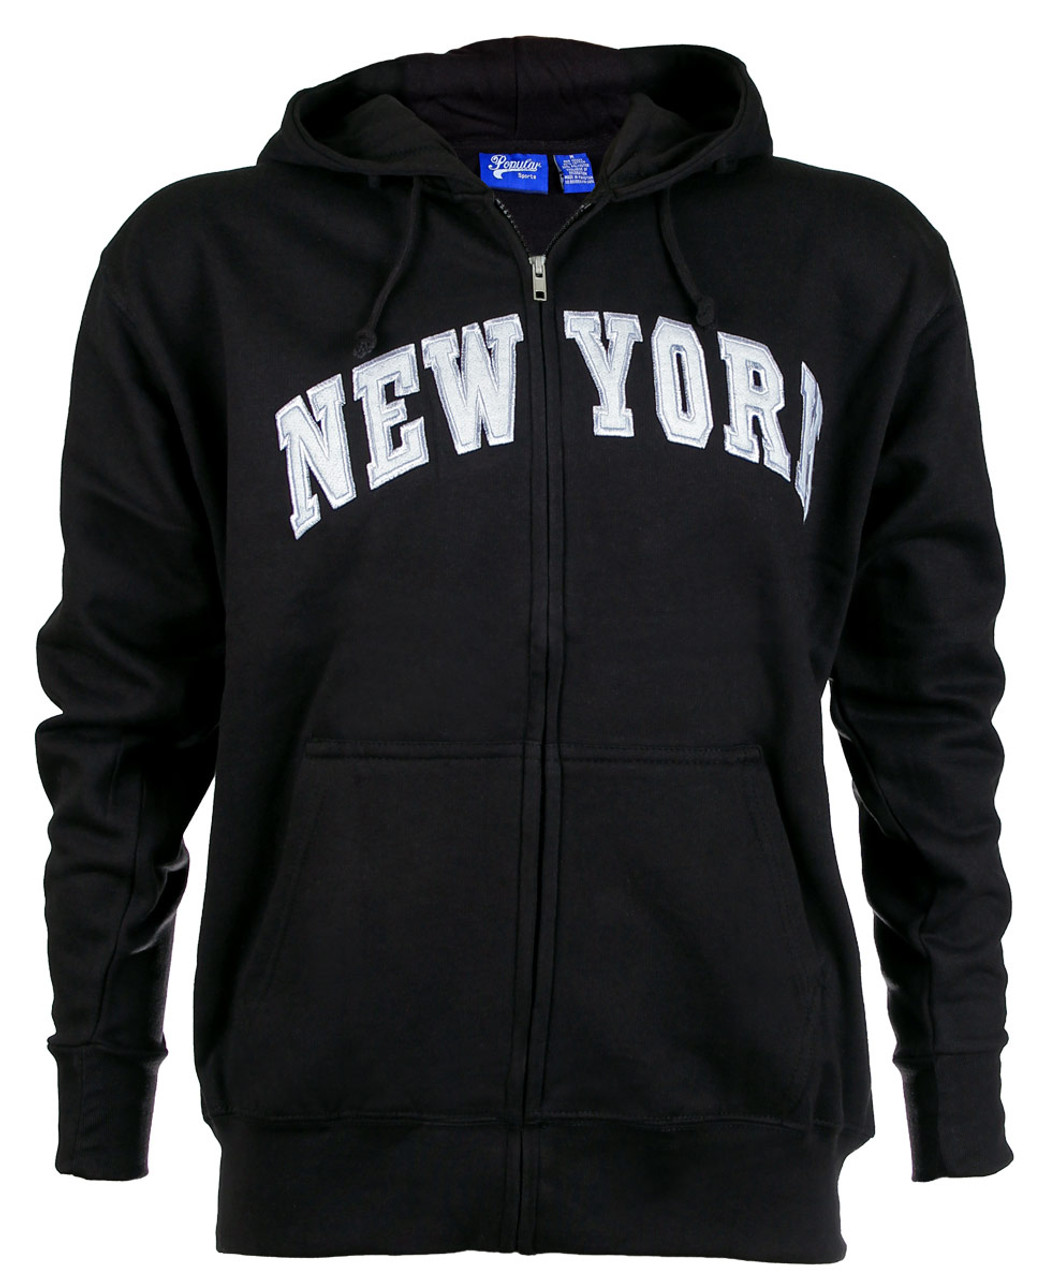 New York Zipper Hoodie - Size: Adult X-Large - Color: Black